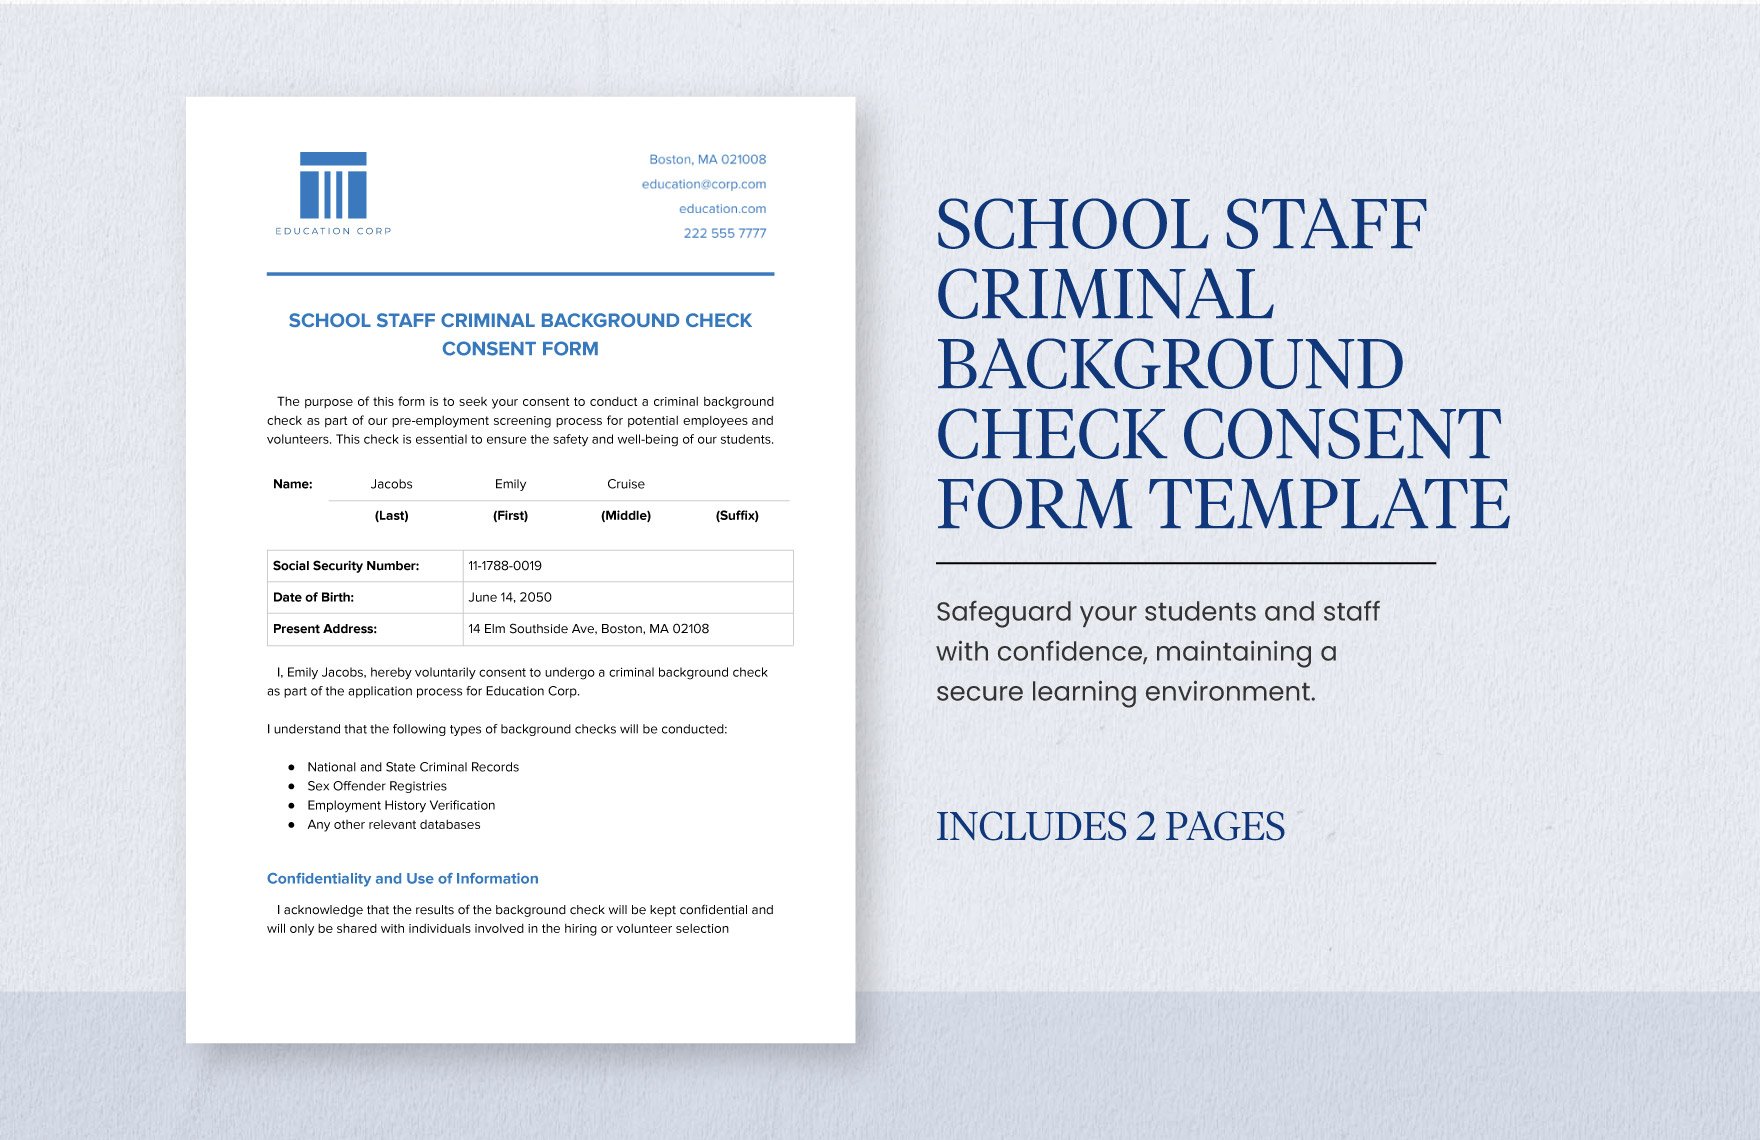 School Staff Criminal Background Check Consent Form Template